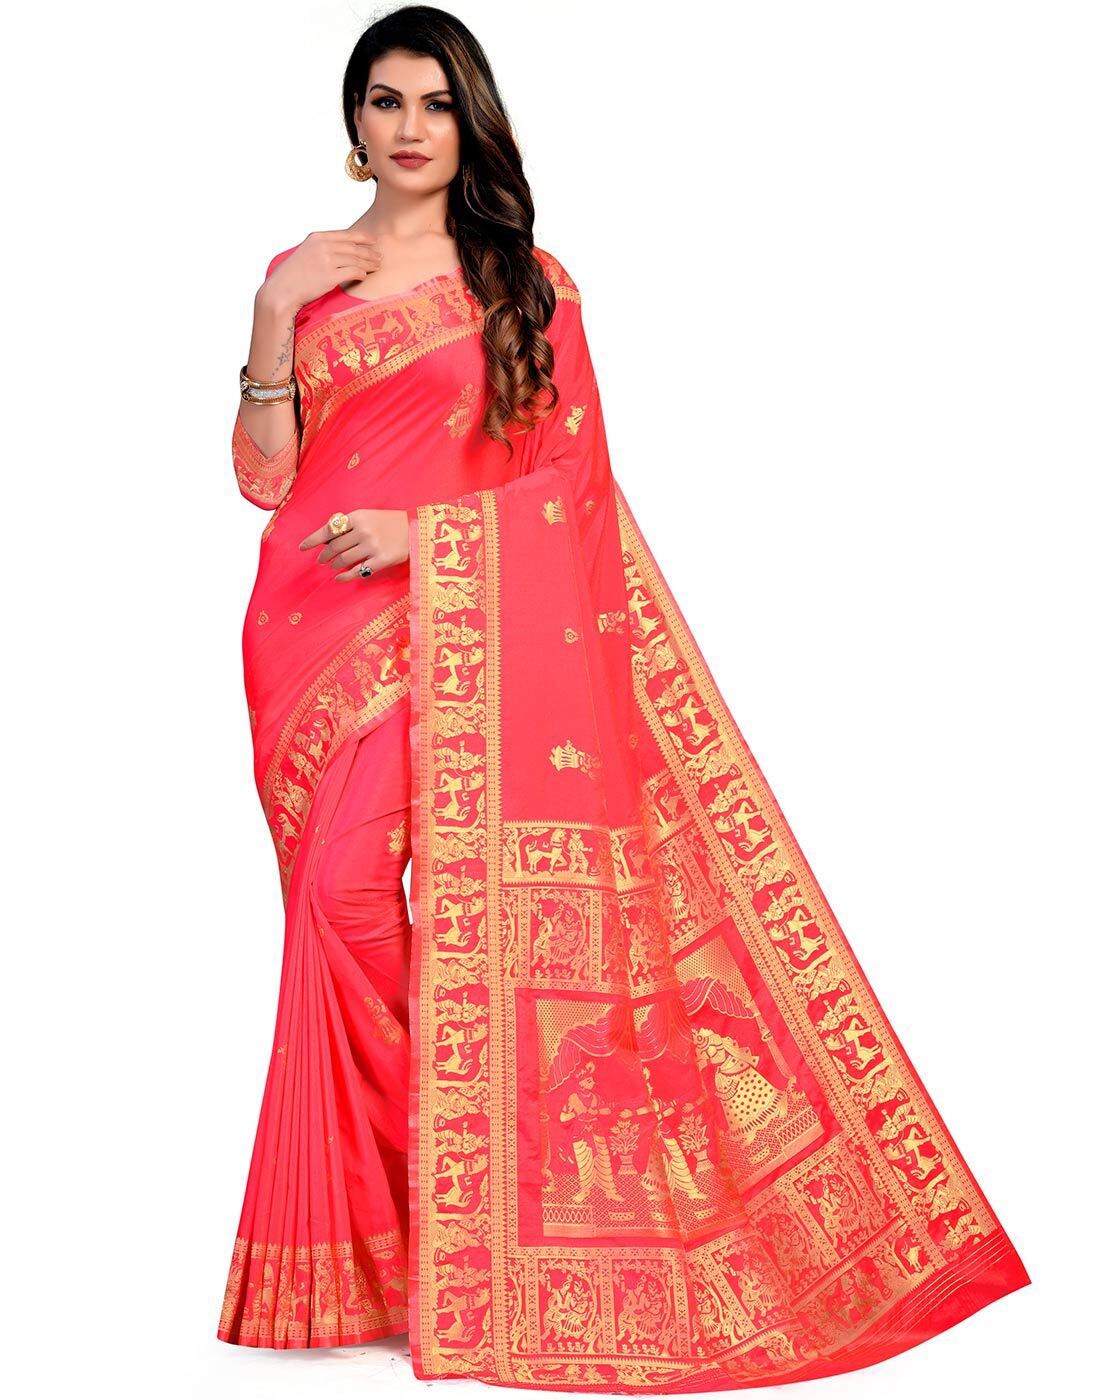 Wedding White Body With Red Pallu And Border Baluchari Silk Saree, 6.3 m  (with blouse piece) at Rs 9000 in Kolkata